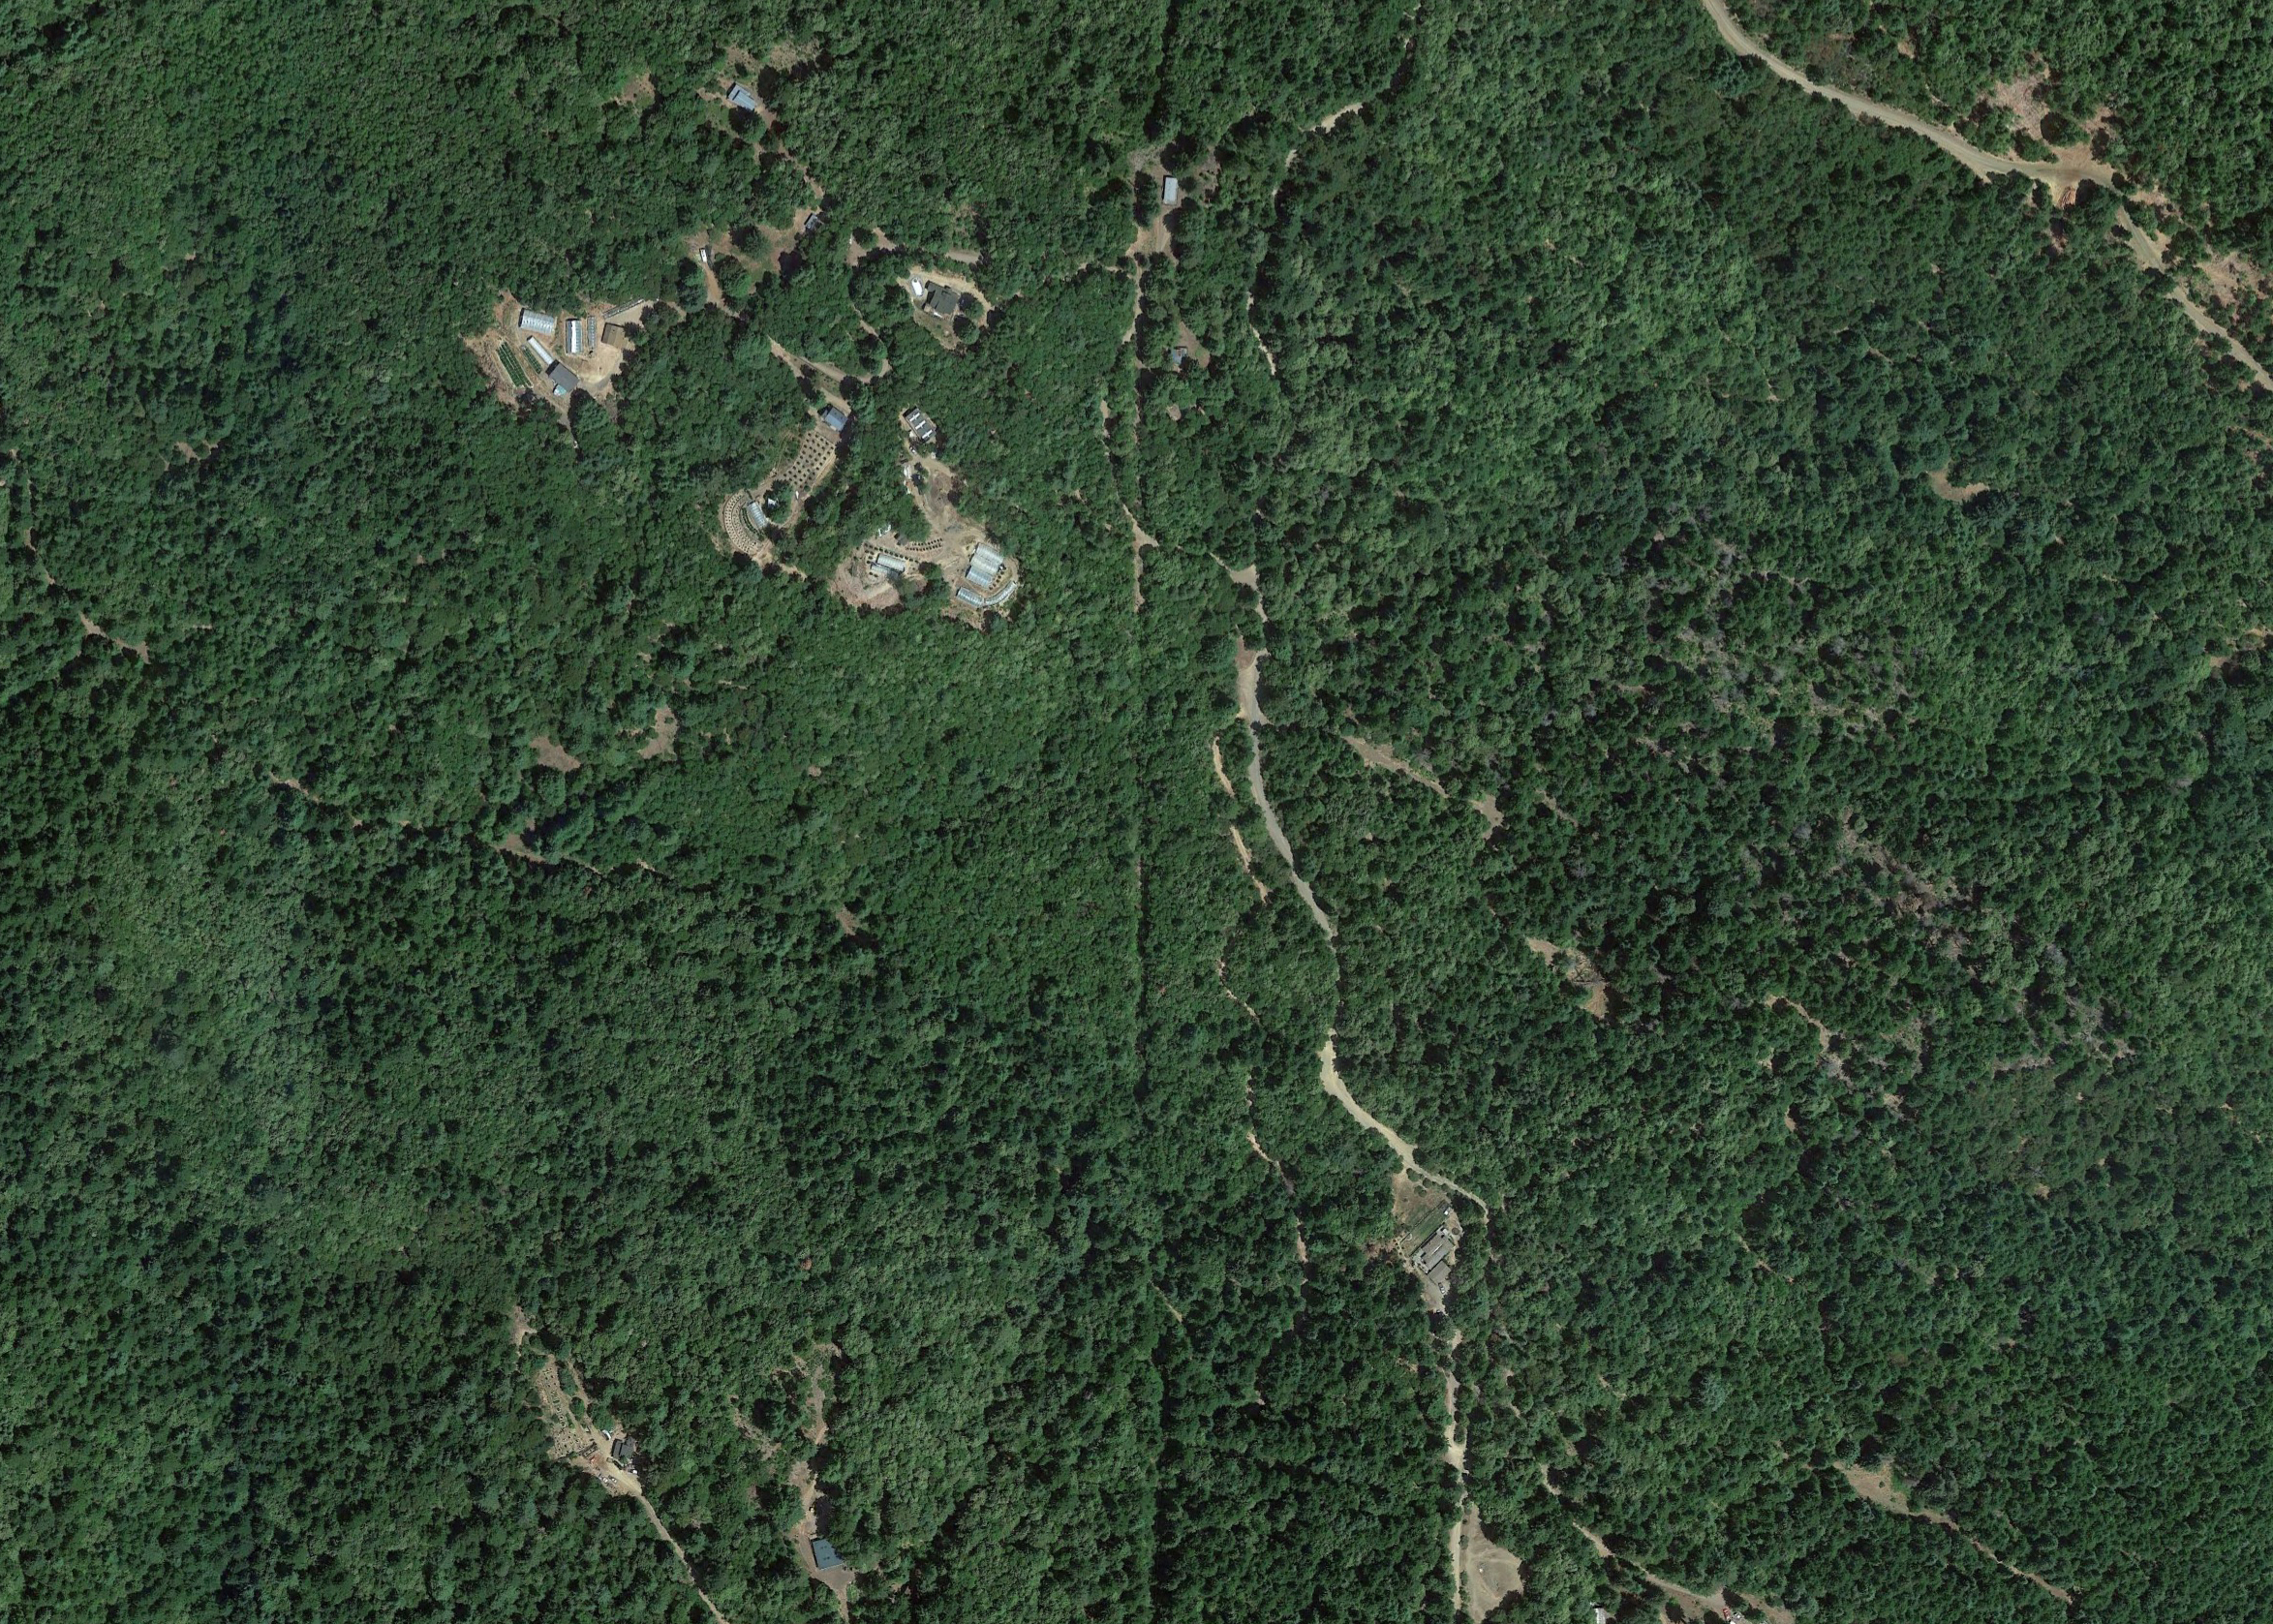 satellite photo of grow sites and roads encroaching into forests and fragmenting the landscape